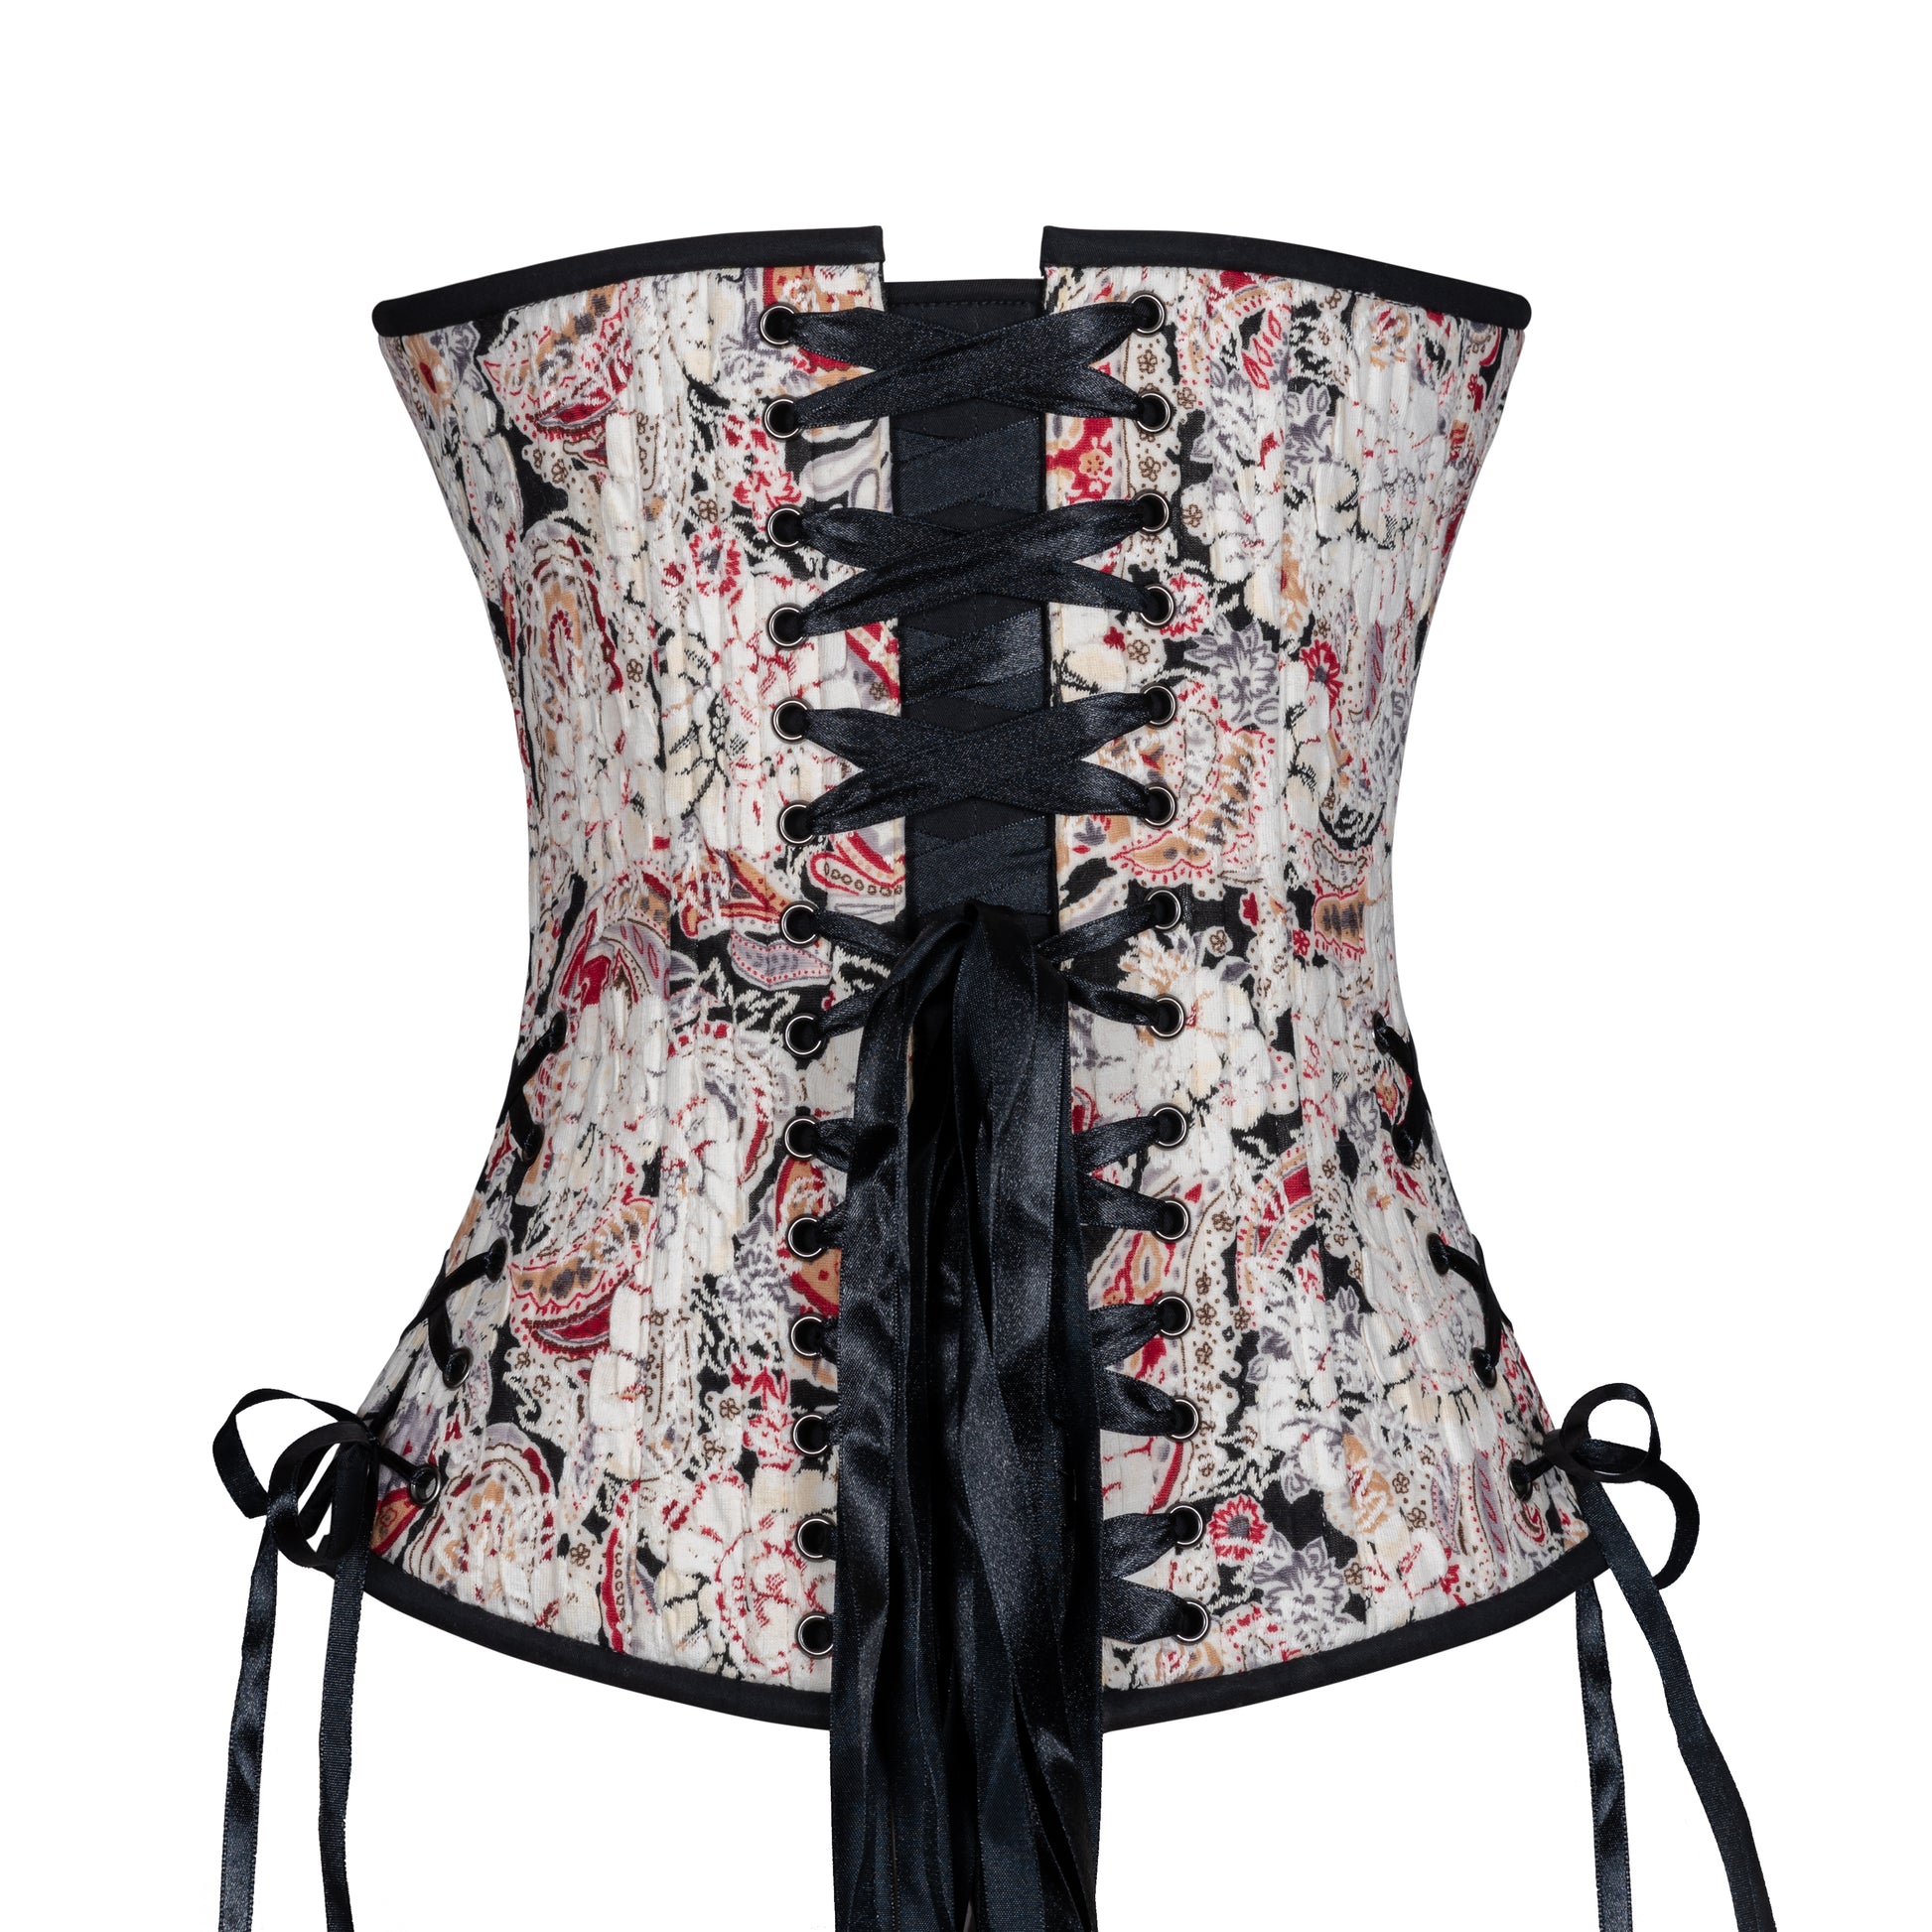 Vintage 1920s Printed Overbust Corset